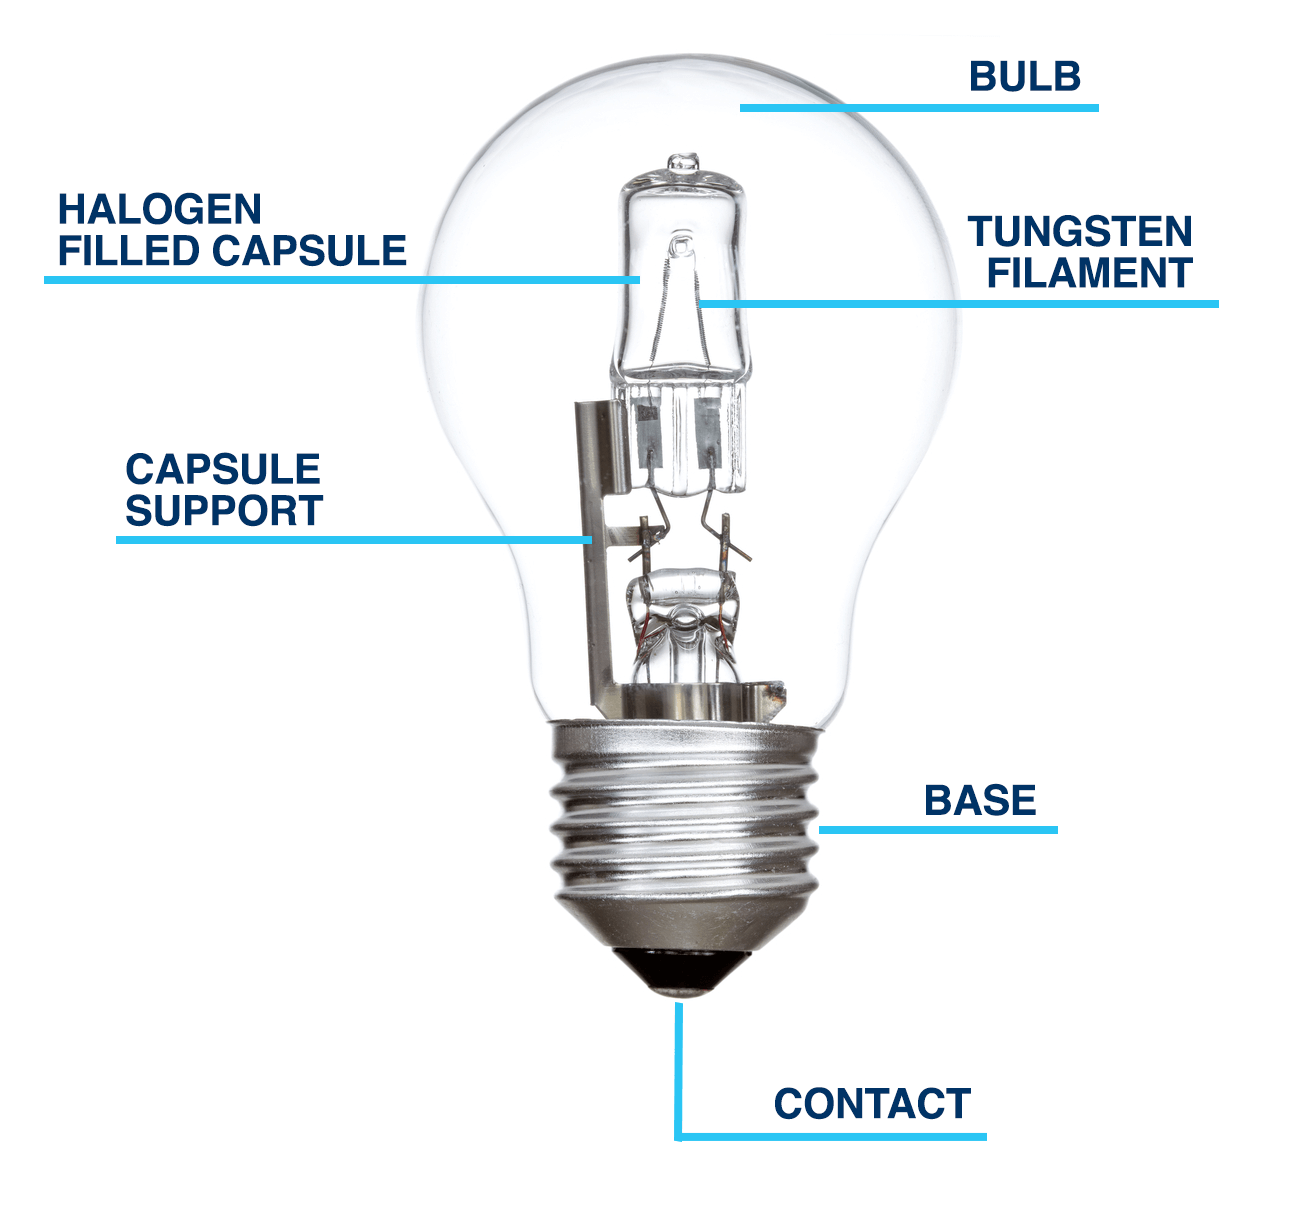 What you need to know about halogen lamps